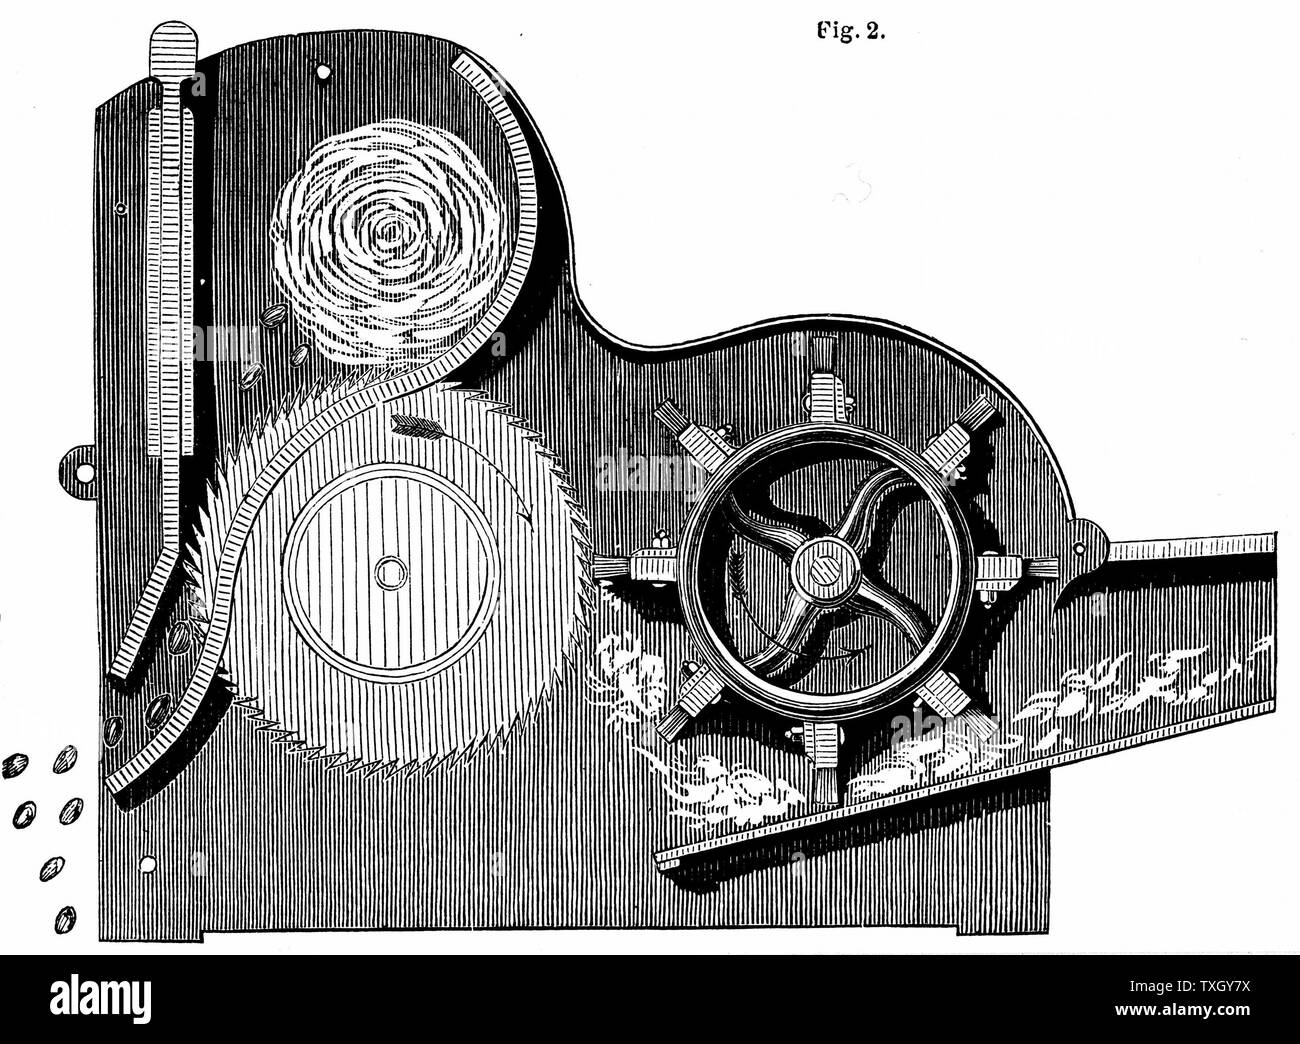 Cross-section of Elihu Whitney's (1765-1825) saw-gin for cleaning cotton.  Seeds can be seen ejected on left, while cotton fibres are passing on right 1865 Wood engraving Stock Photo